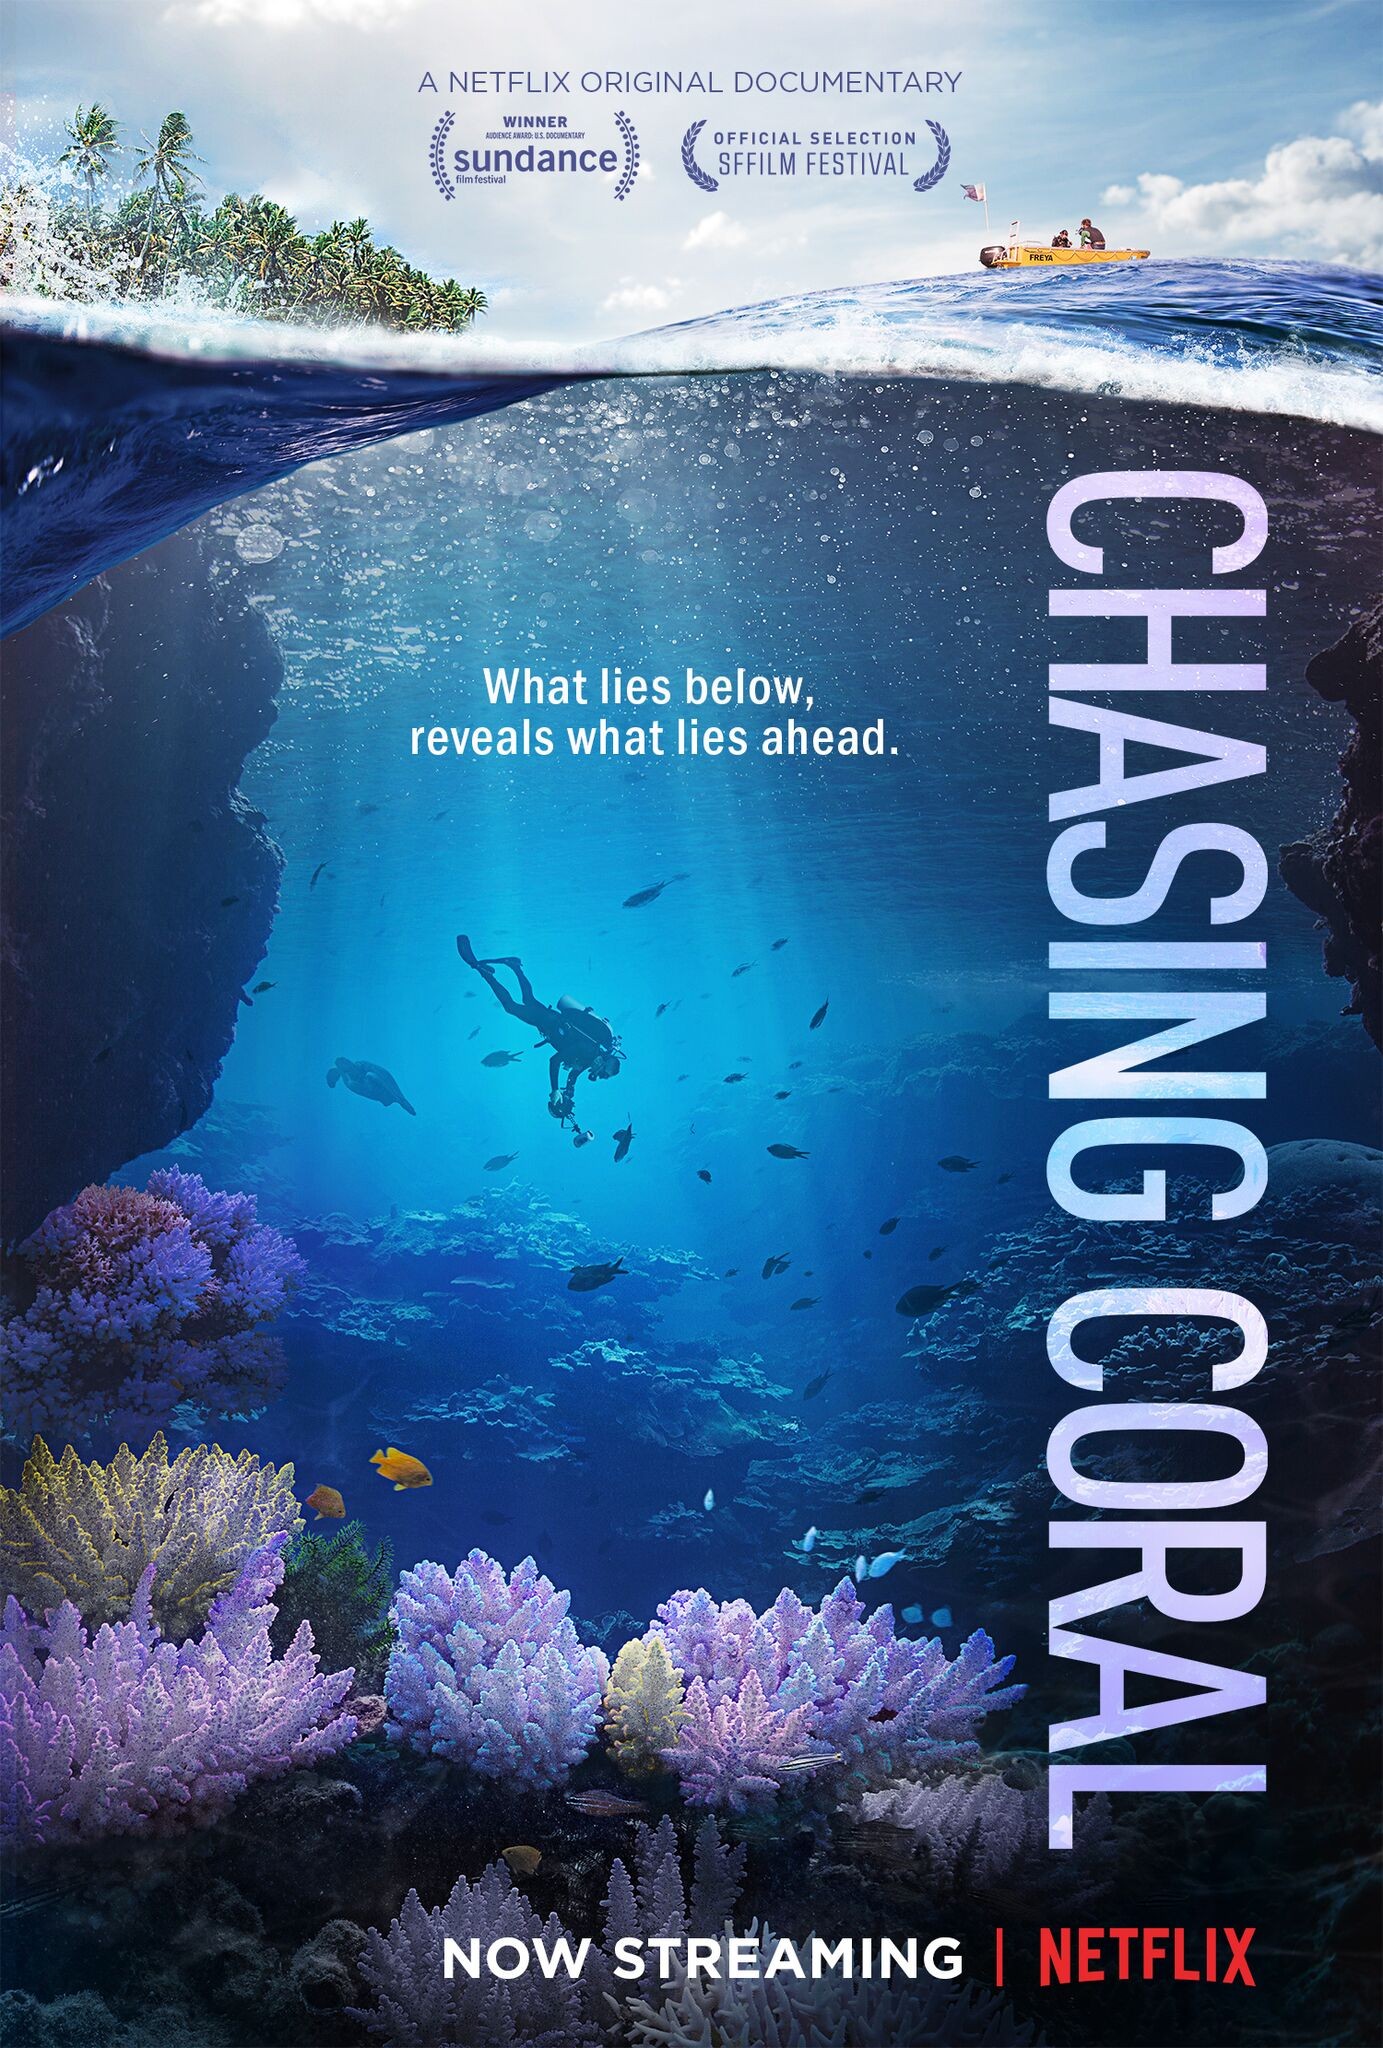 Multiple Screenings Of The ‘Chasing Coral’ Documentary Are Taking Place This Week